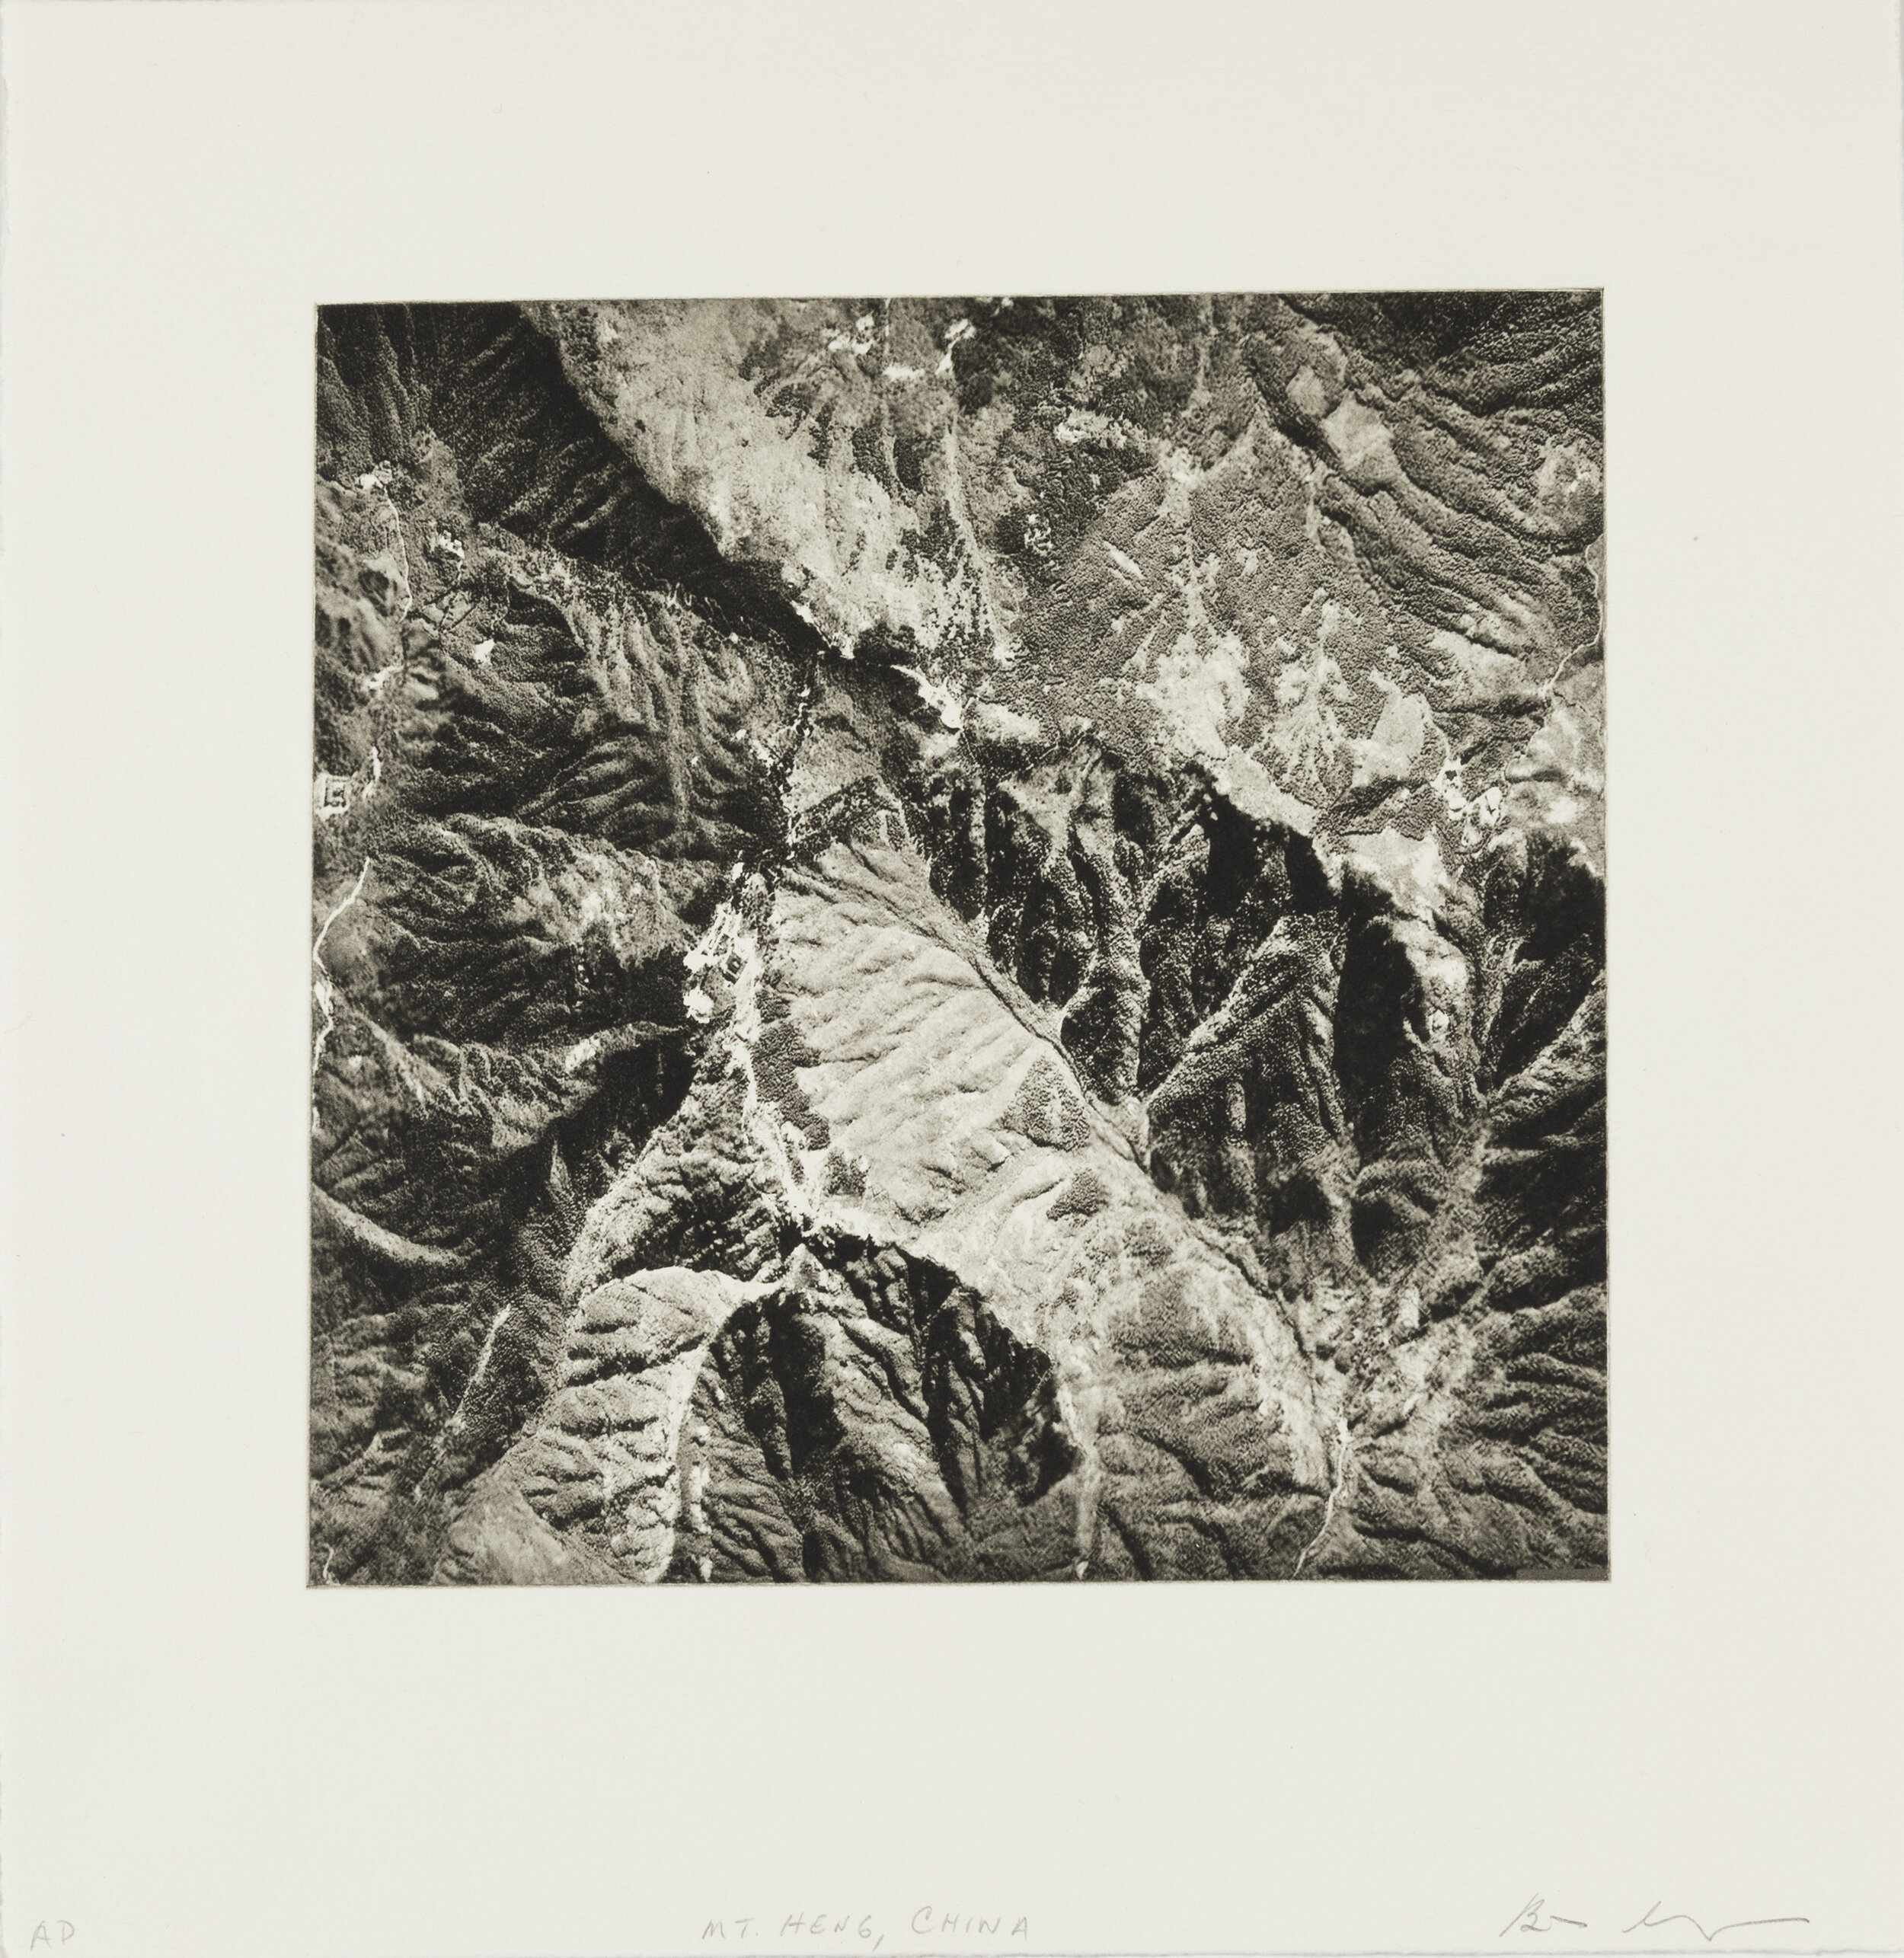    Mount Heng, Shanxi, China, 2019    Copperplate photogravure etching on cotton rag paper, plate size; 10.6” x 10.6”, paper size; 16” x 15.5”, edition 10  